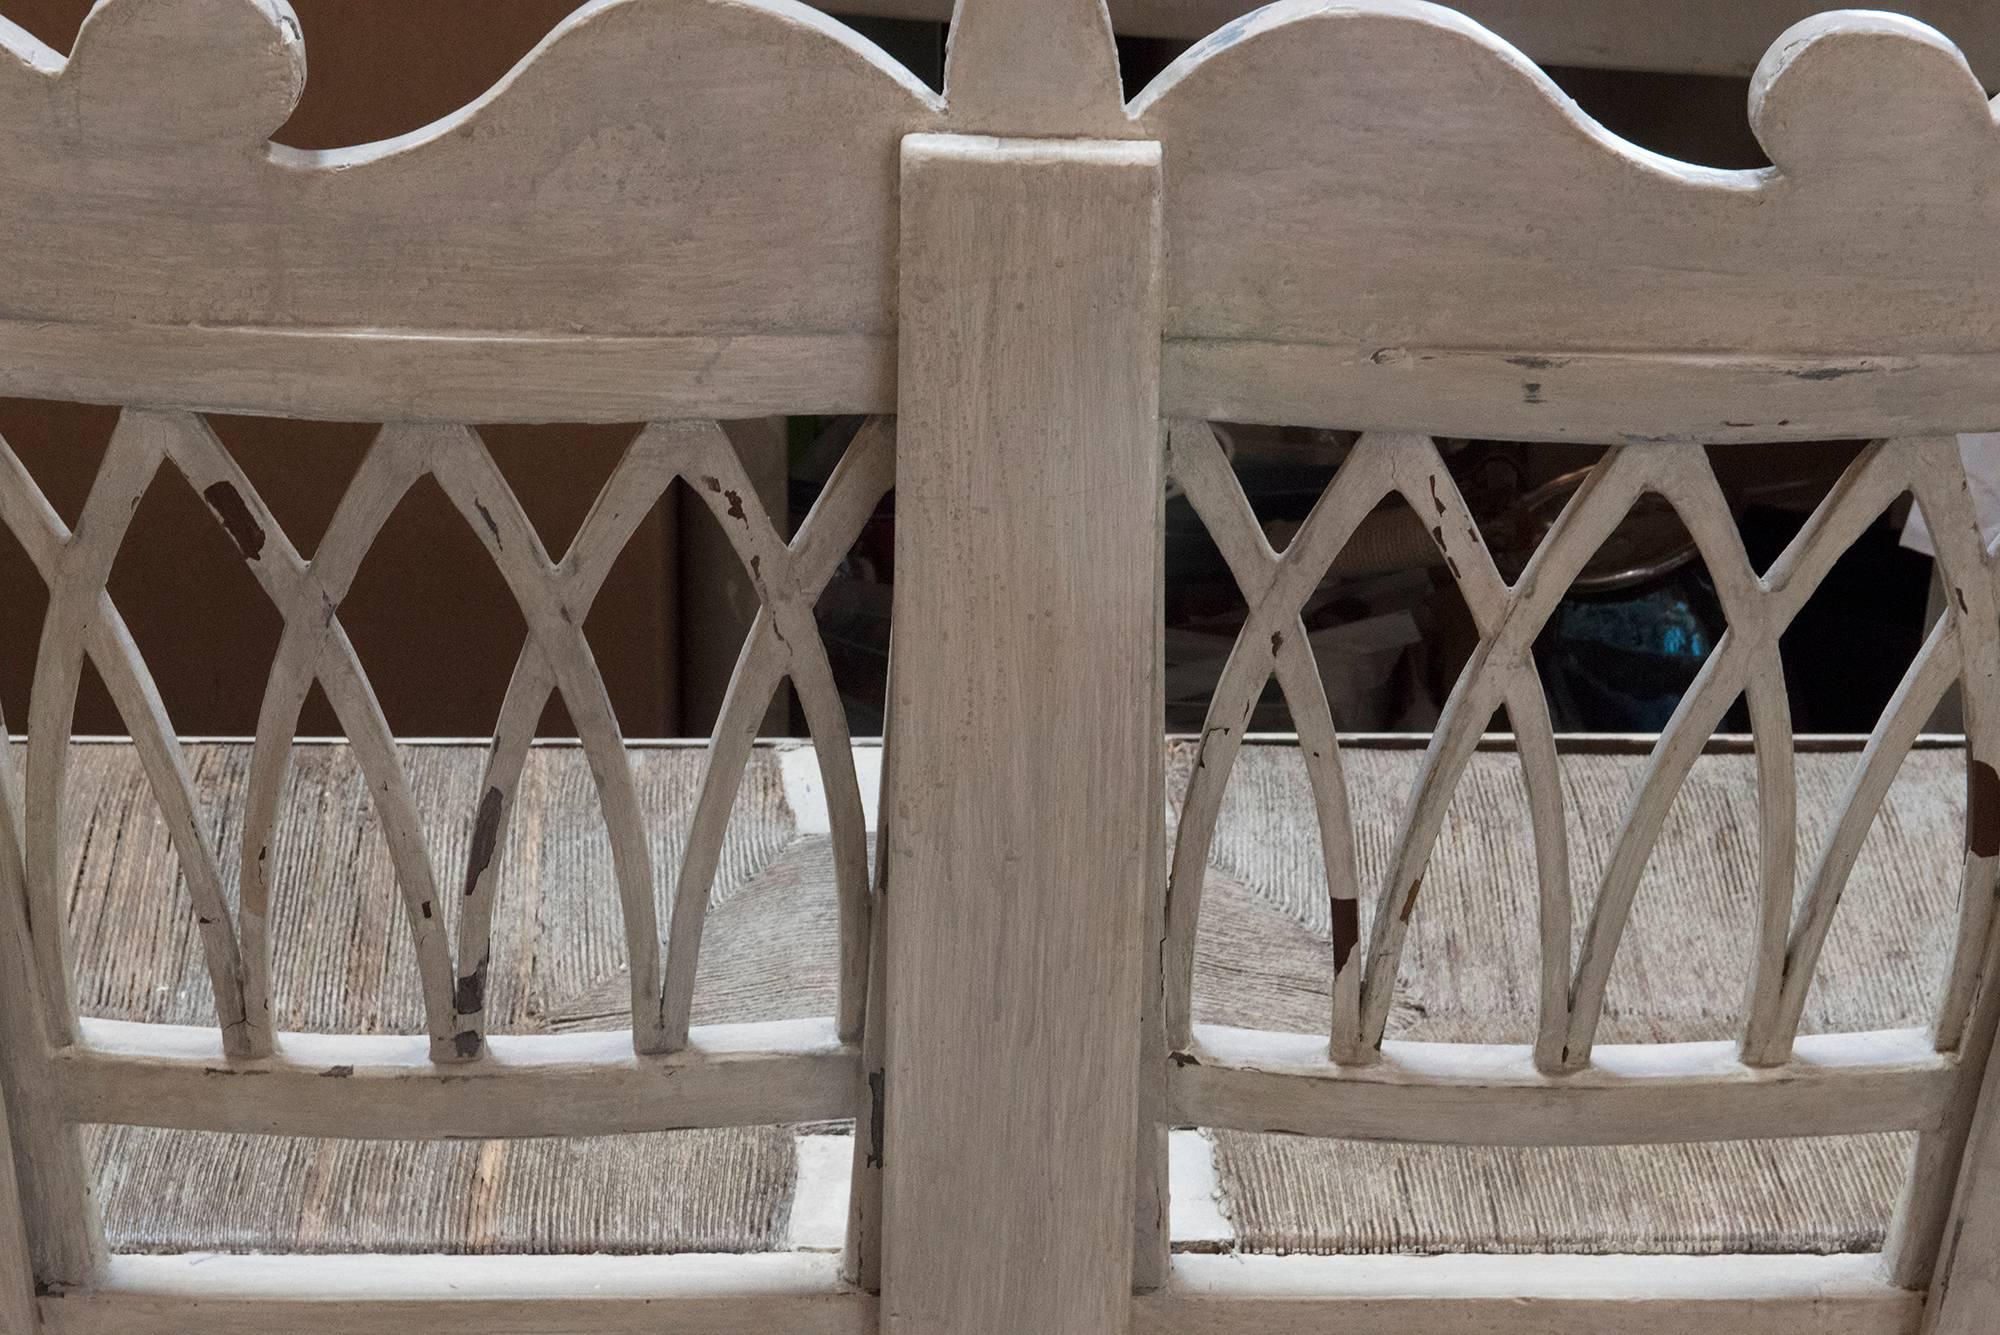 A beautiful, and in fabulous condition, carved Gustavian bench with woven seating in perfect condition [no tears or rips here!], with Swan design on the arm rests. Sculpted back and solid frame make this an exceptional piece for your collection.